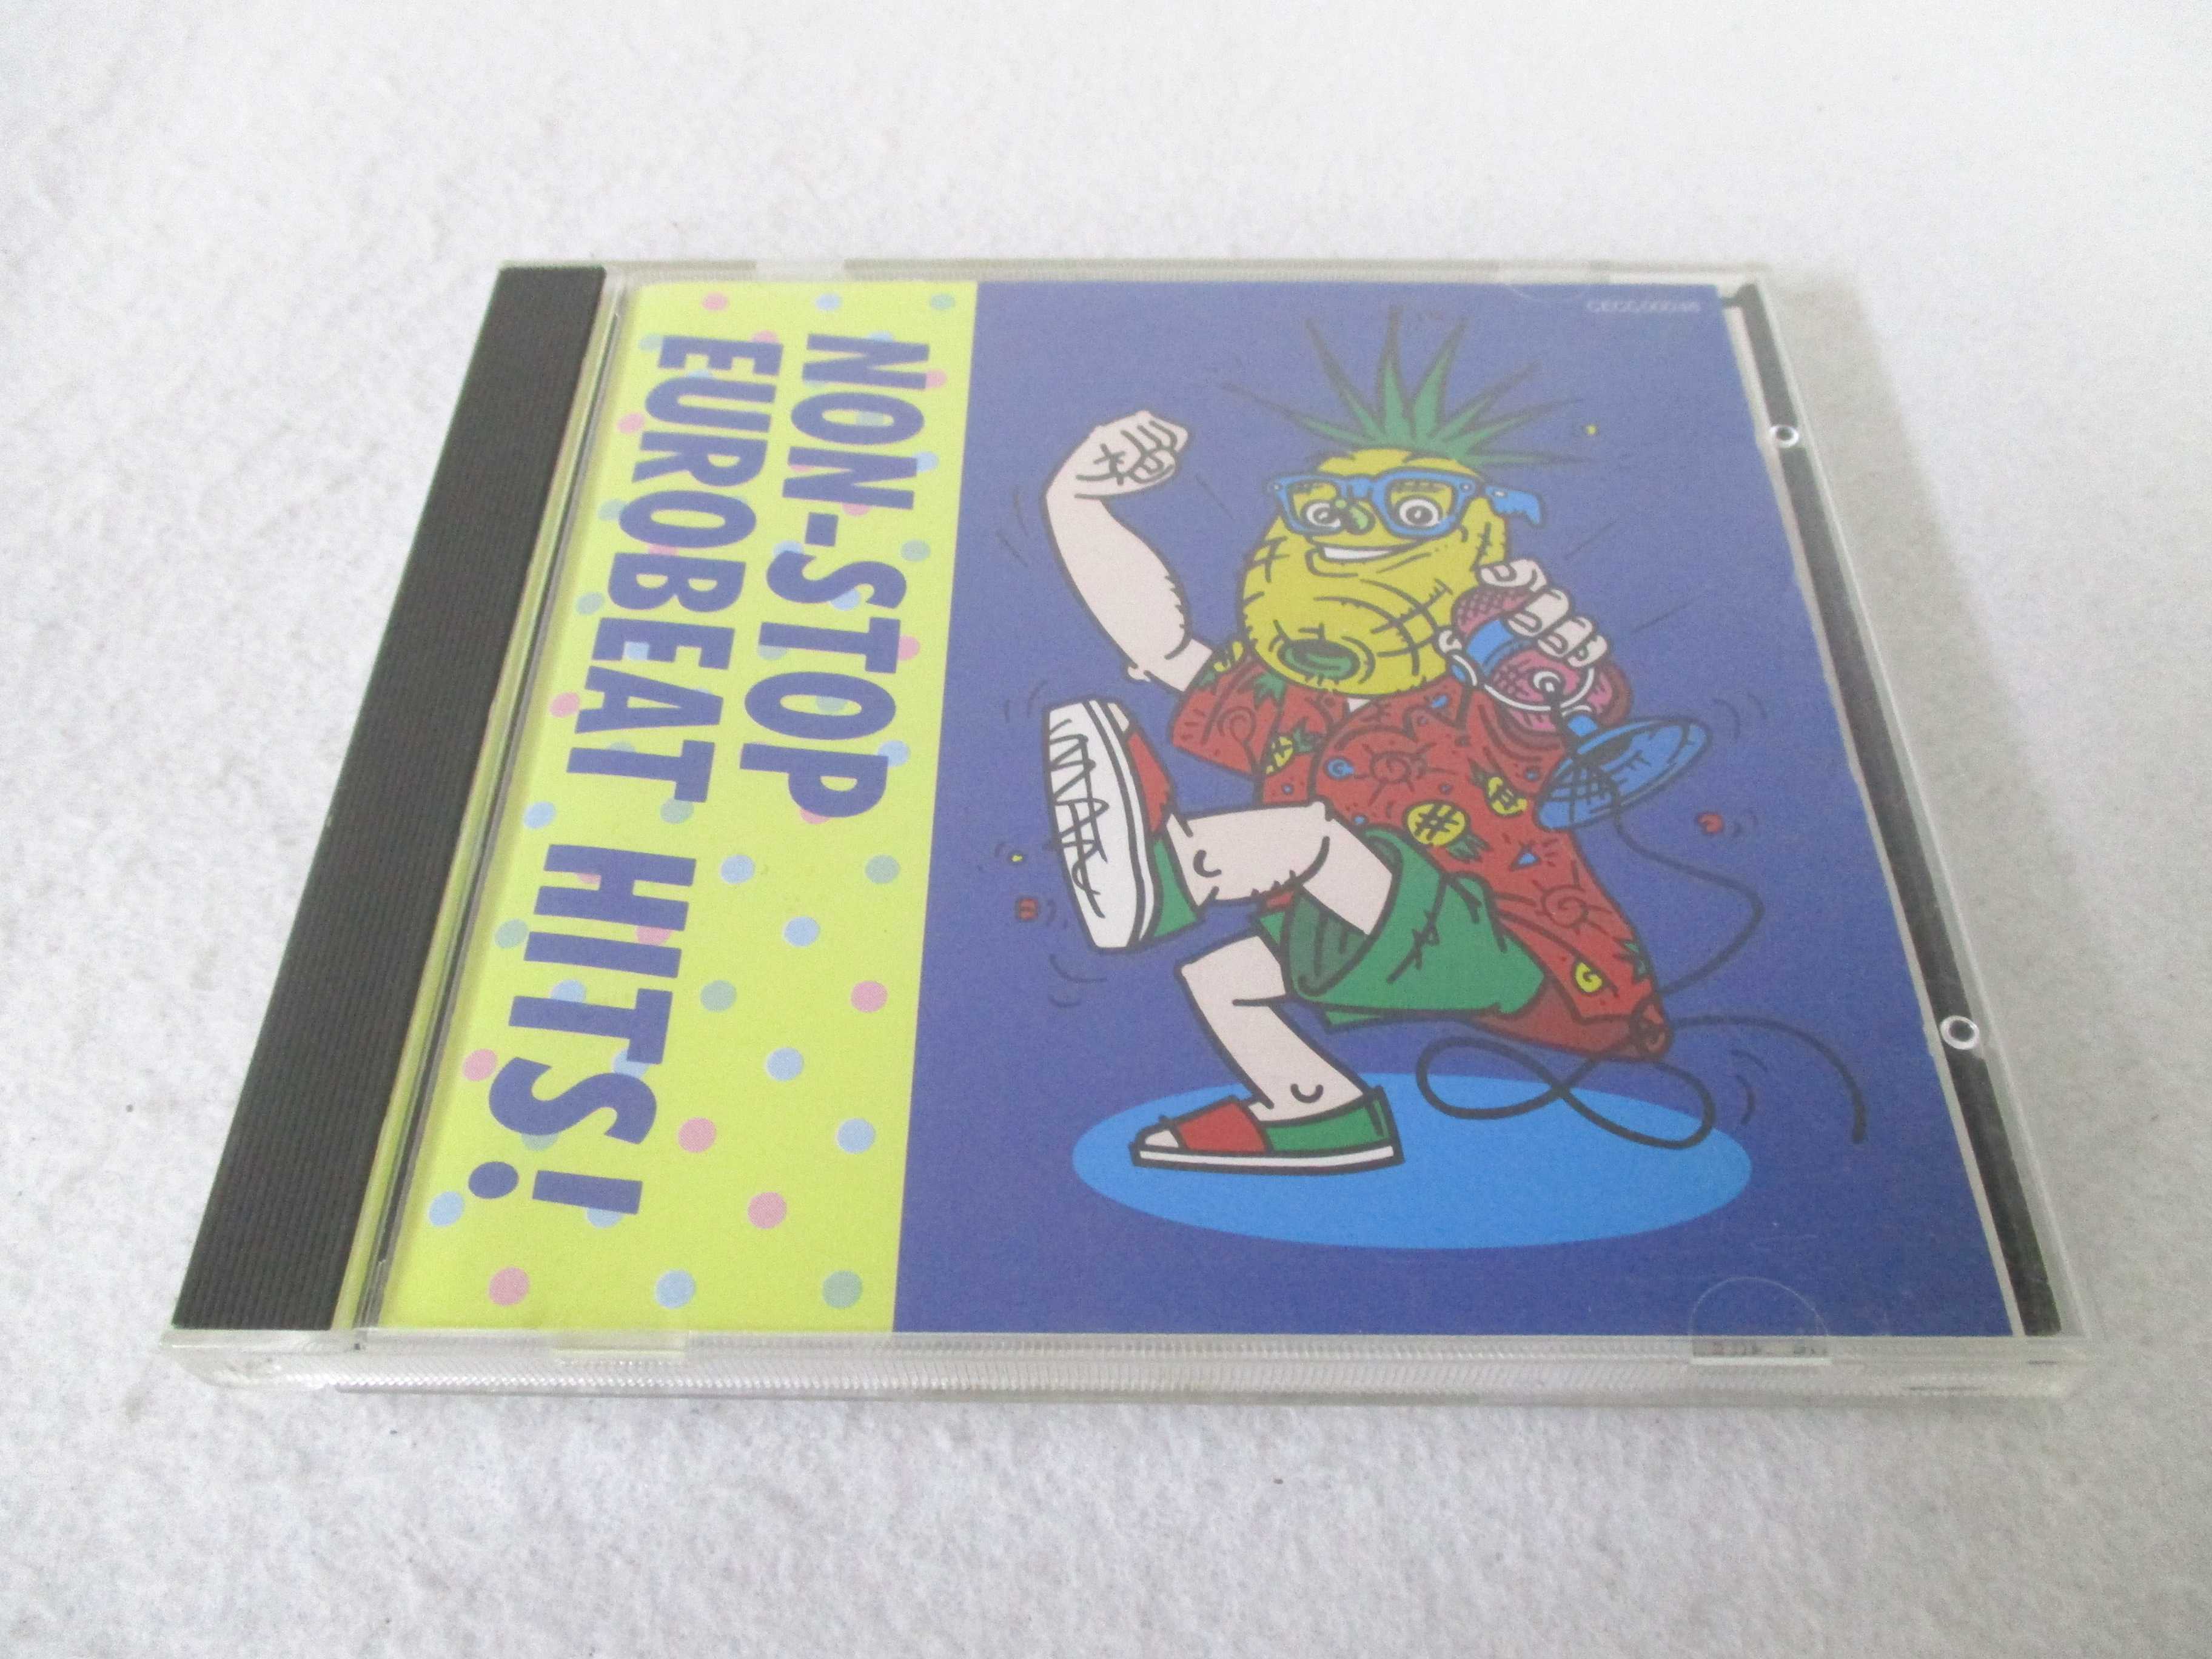 AC04901 【中古】 【CD】 NON-STOP EUROBEAT HITS!/Step Sisters 他